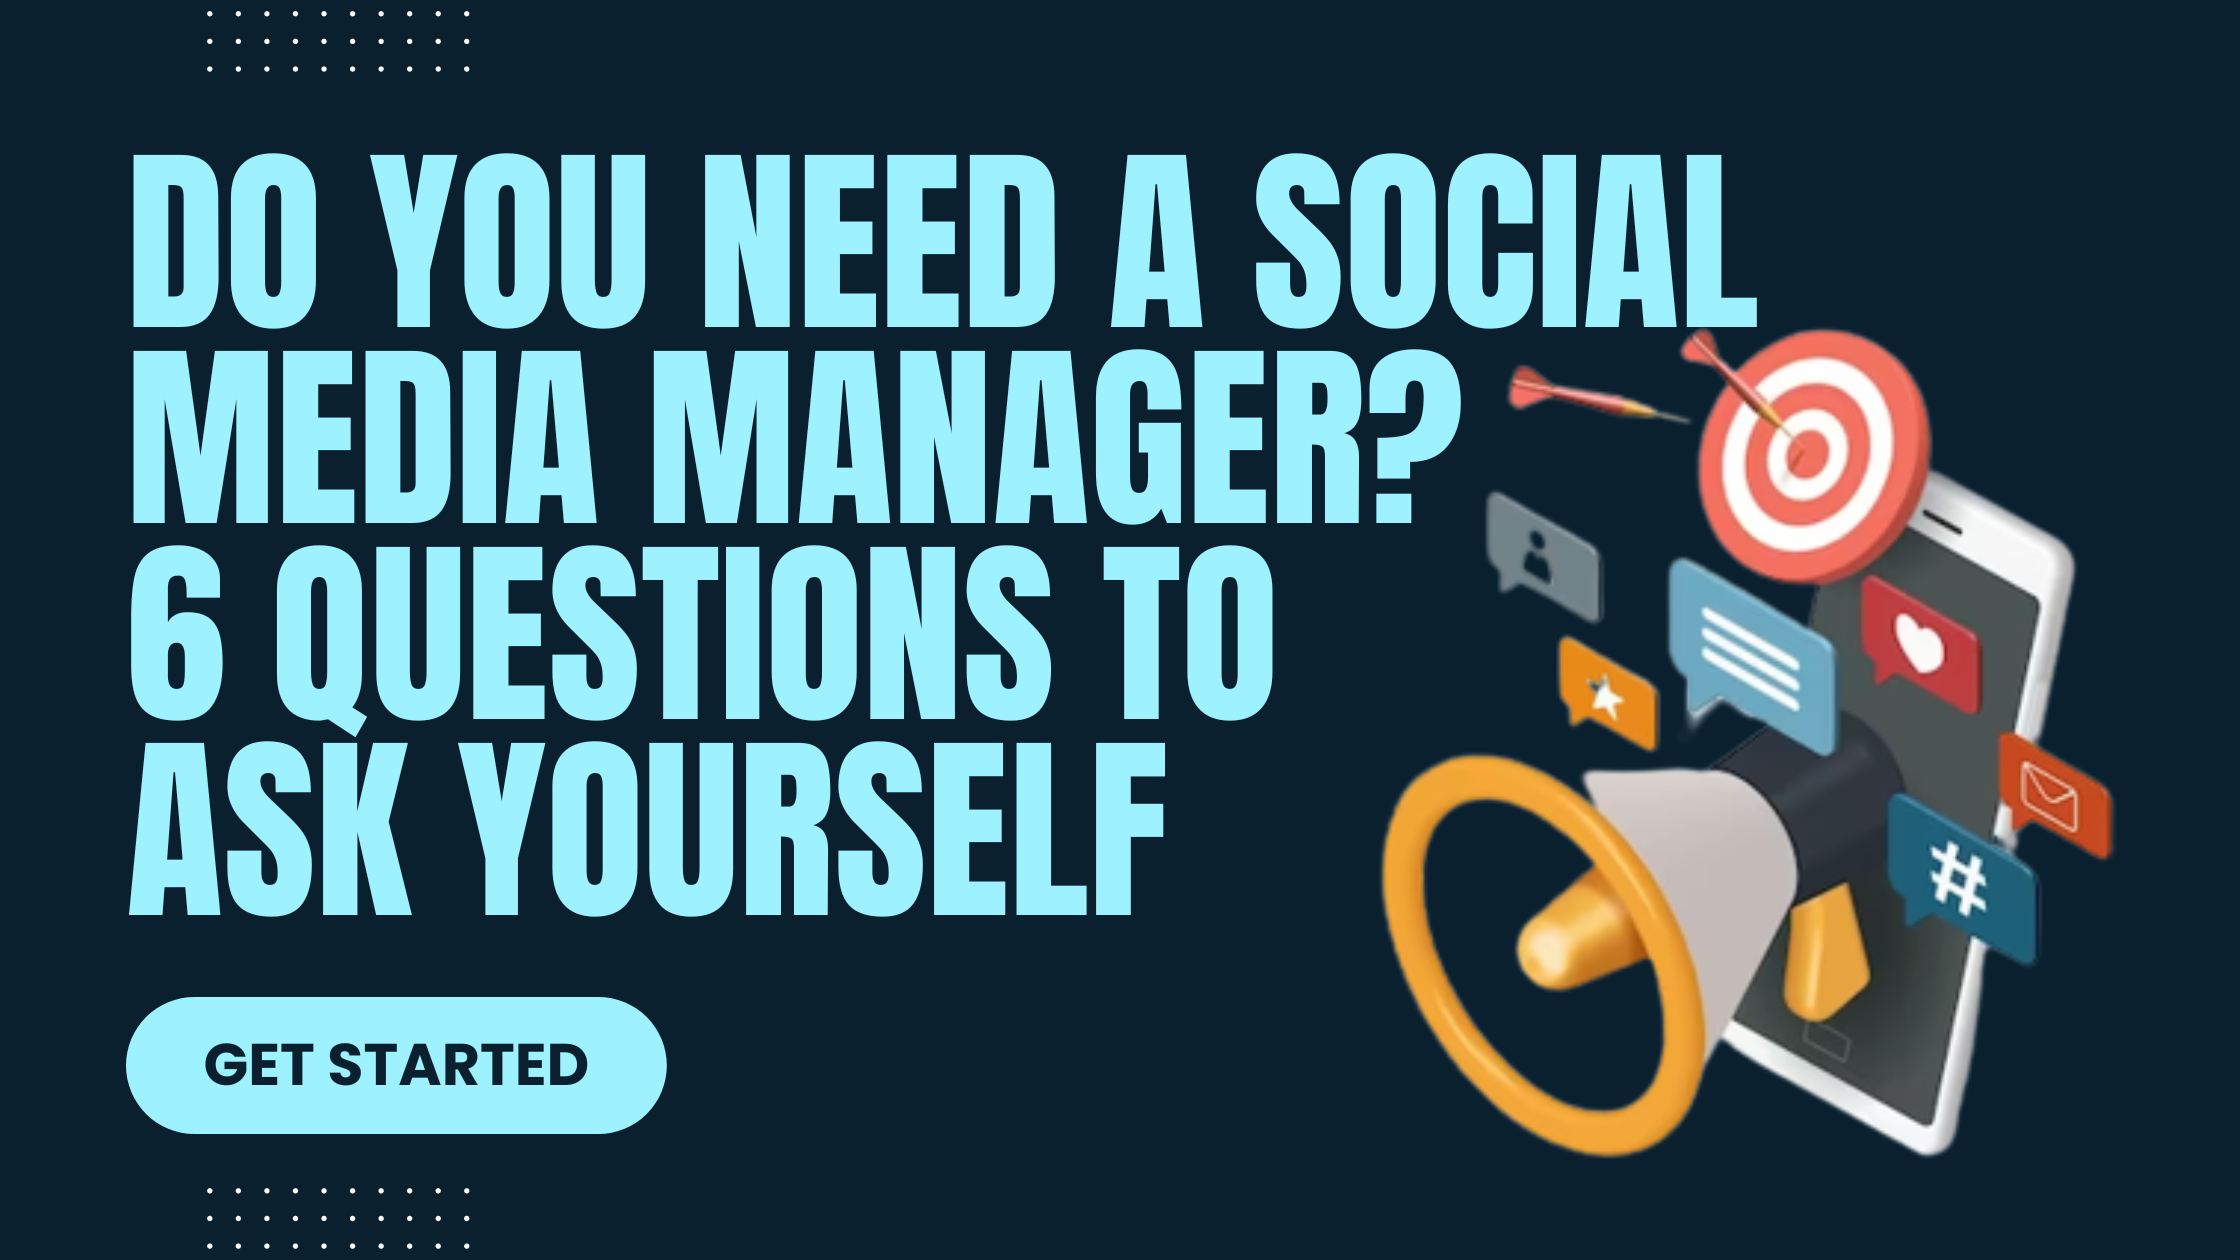 Do You Need A Social Media Manager? 6 Questions To Ask Yourself